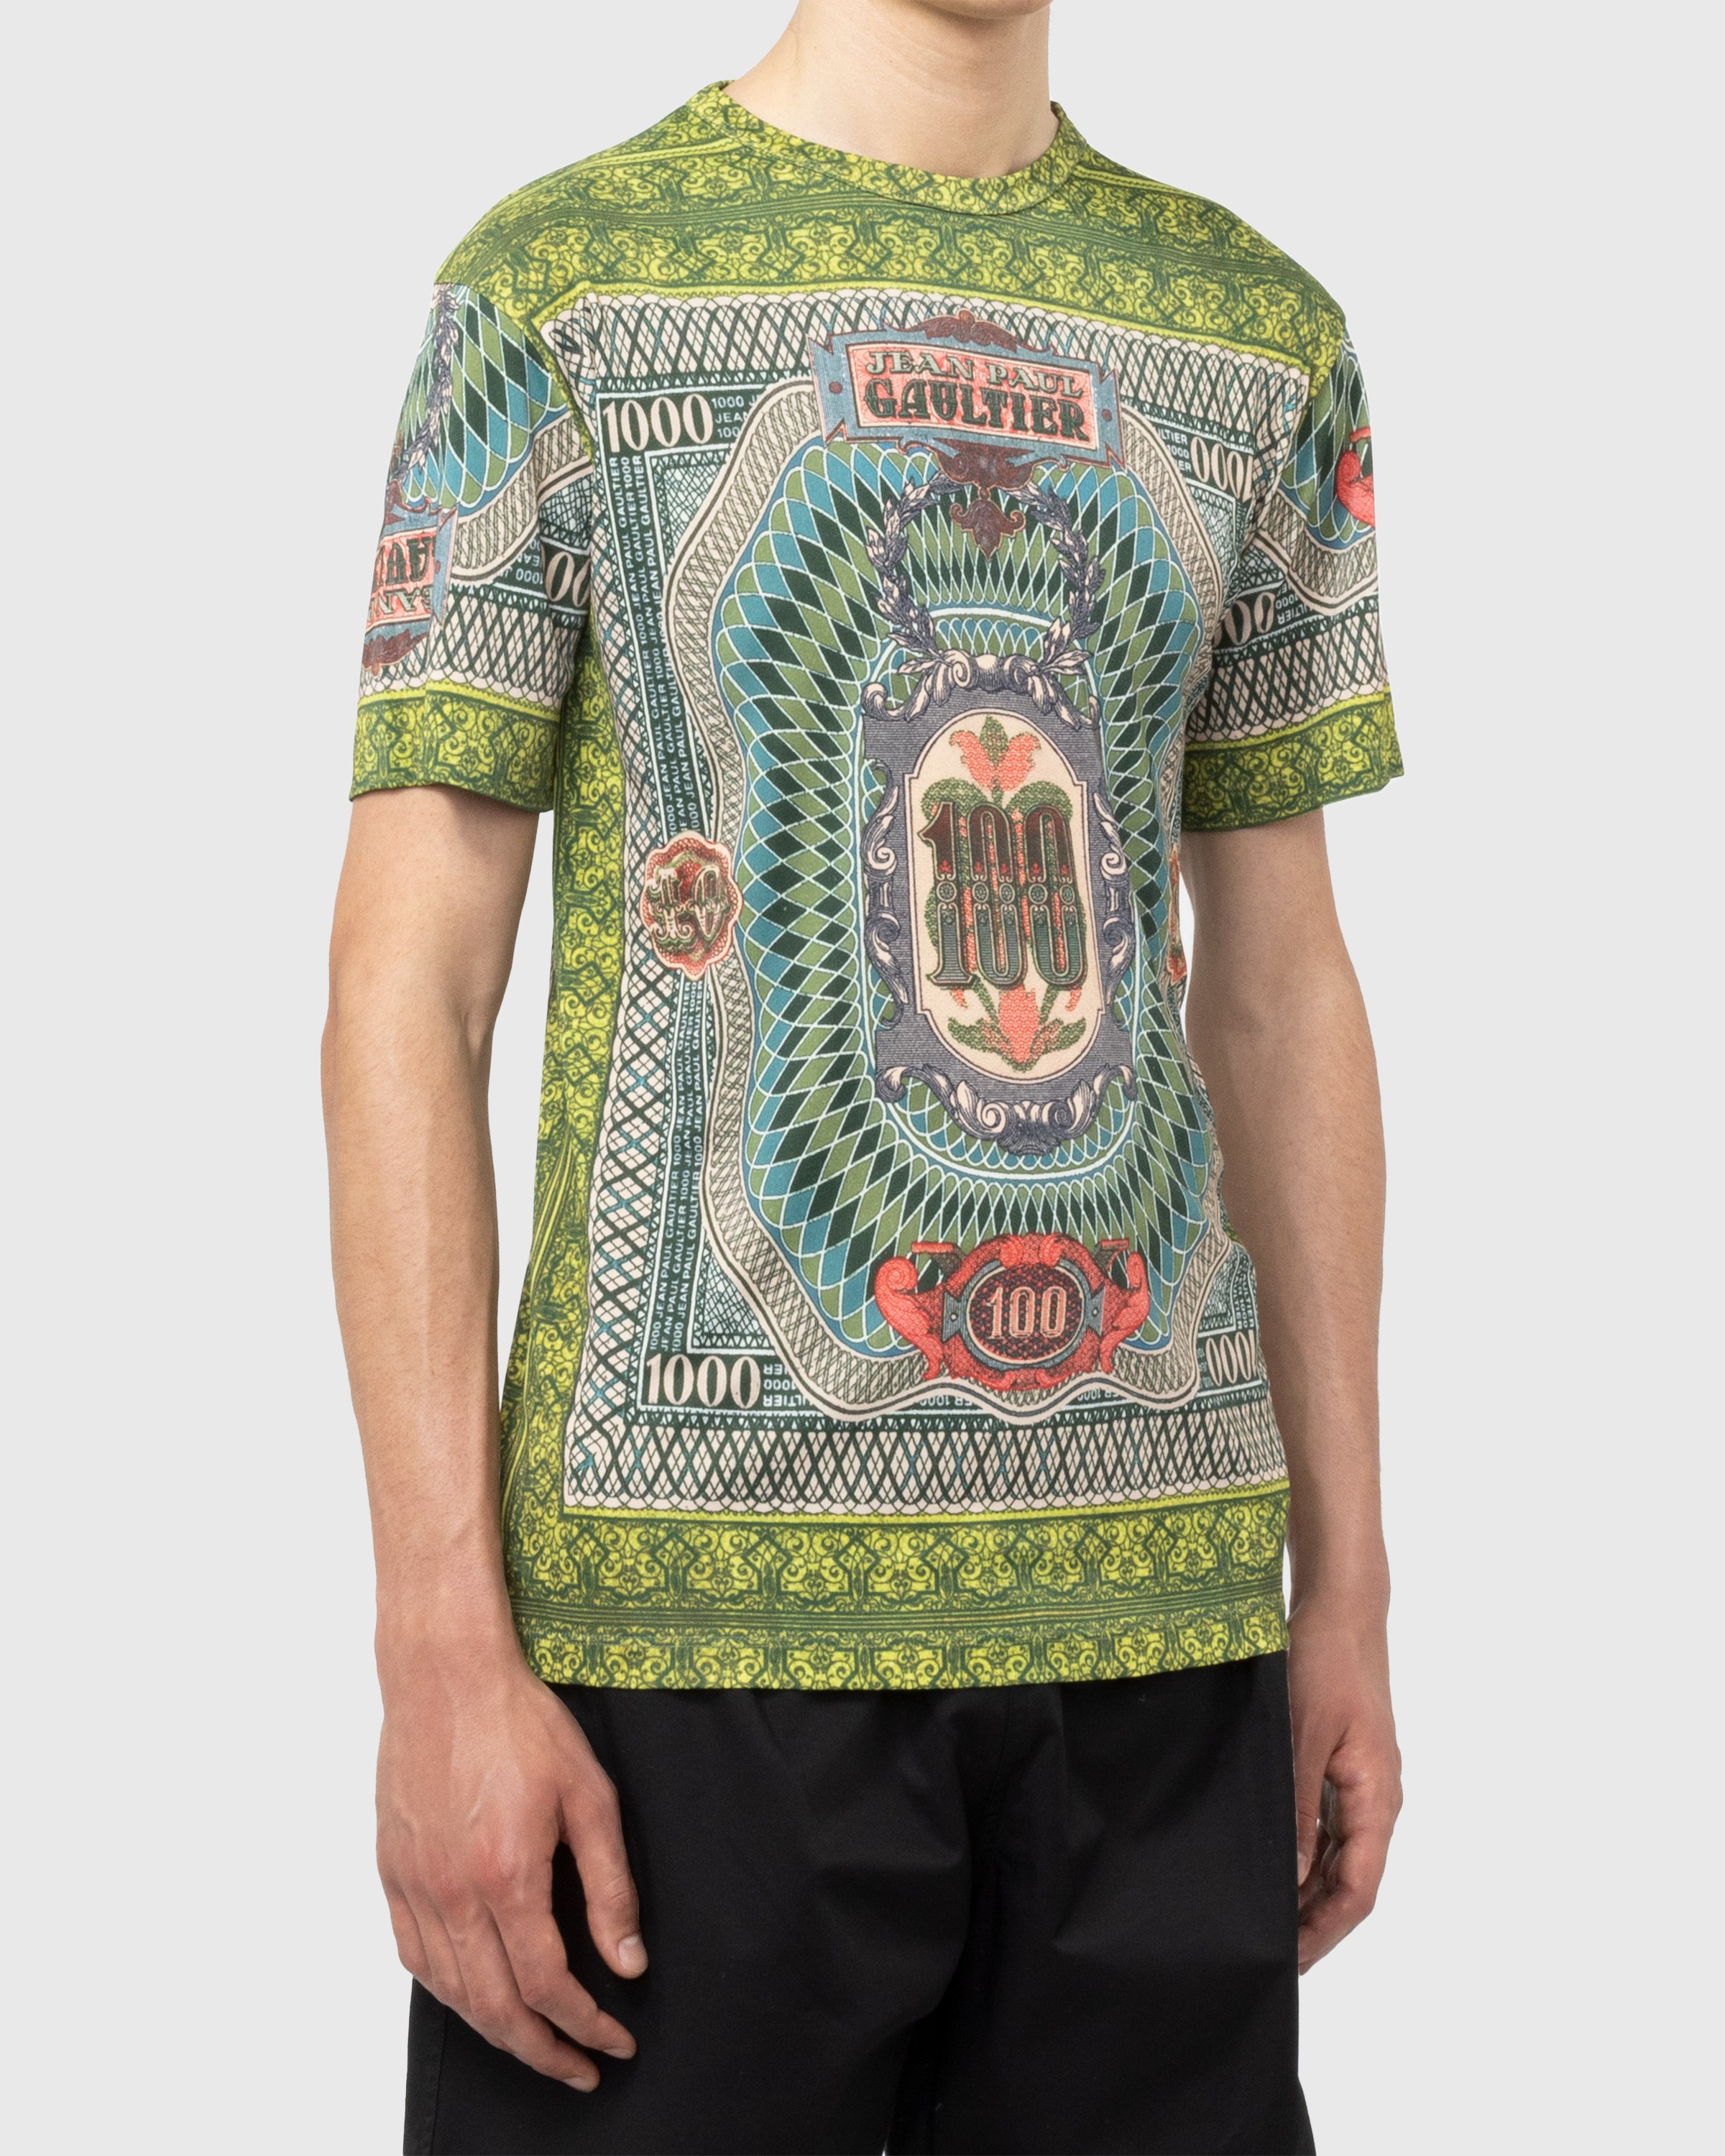 Jean Paul Gaultier - Banknote T-Shirt Multi - Clothing - Green - Image 5